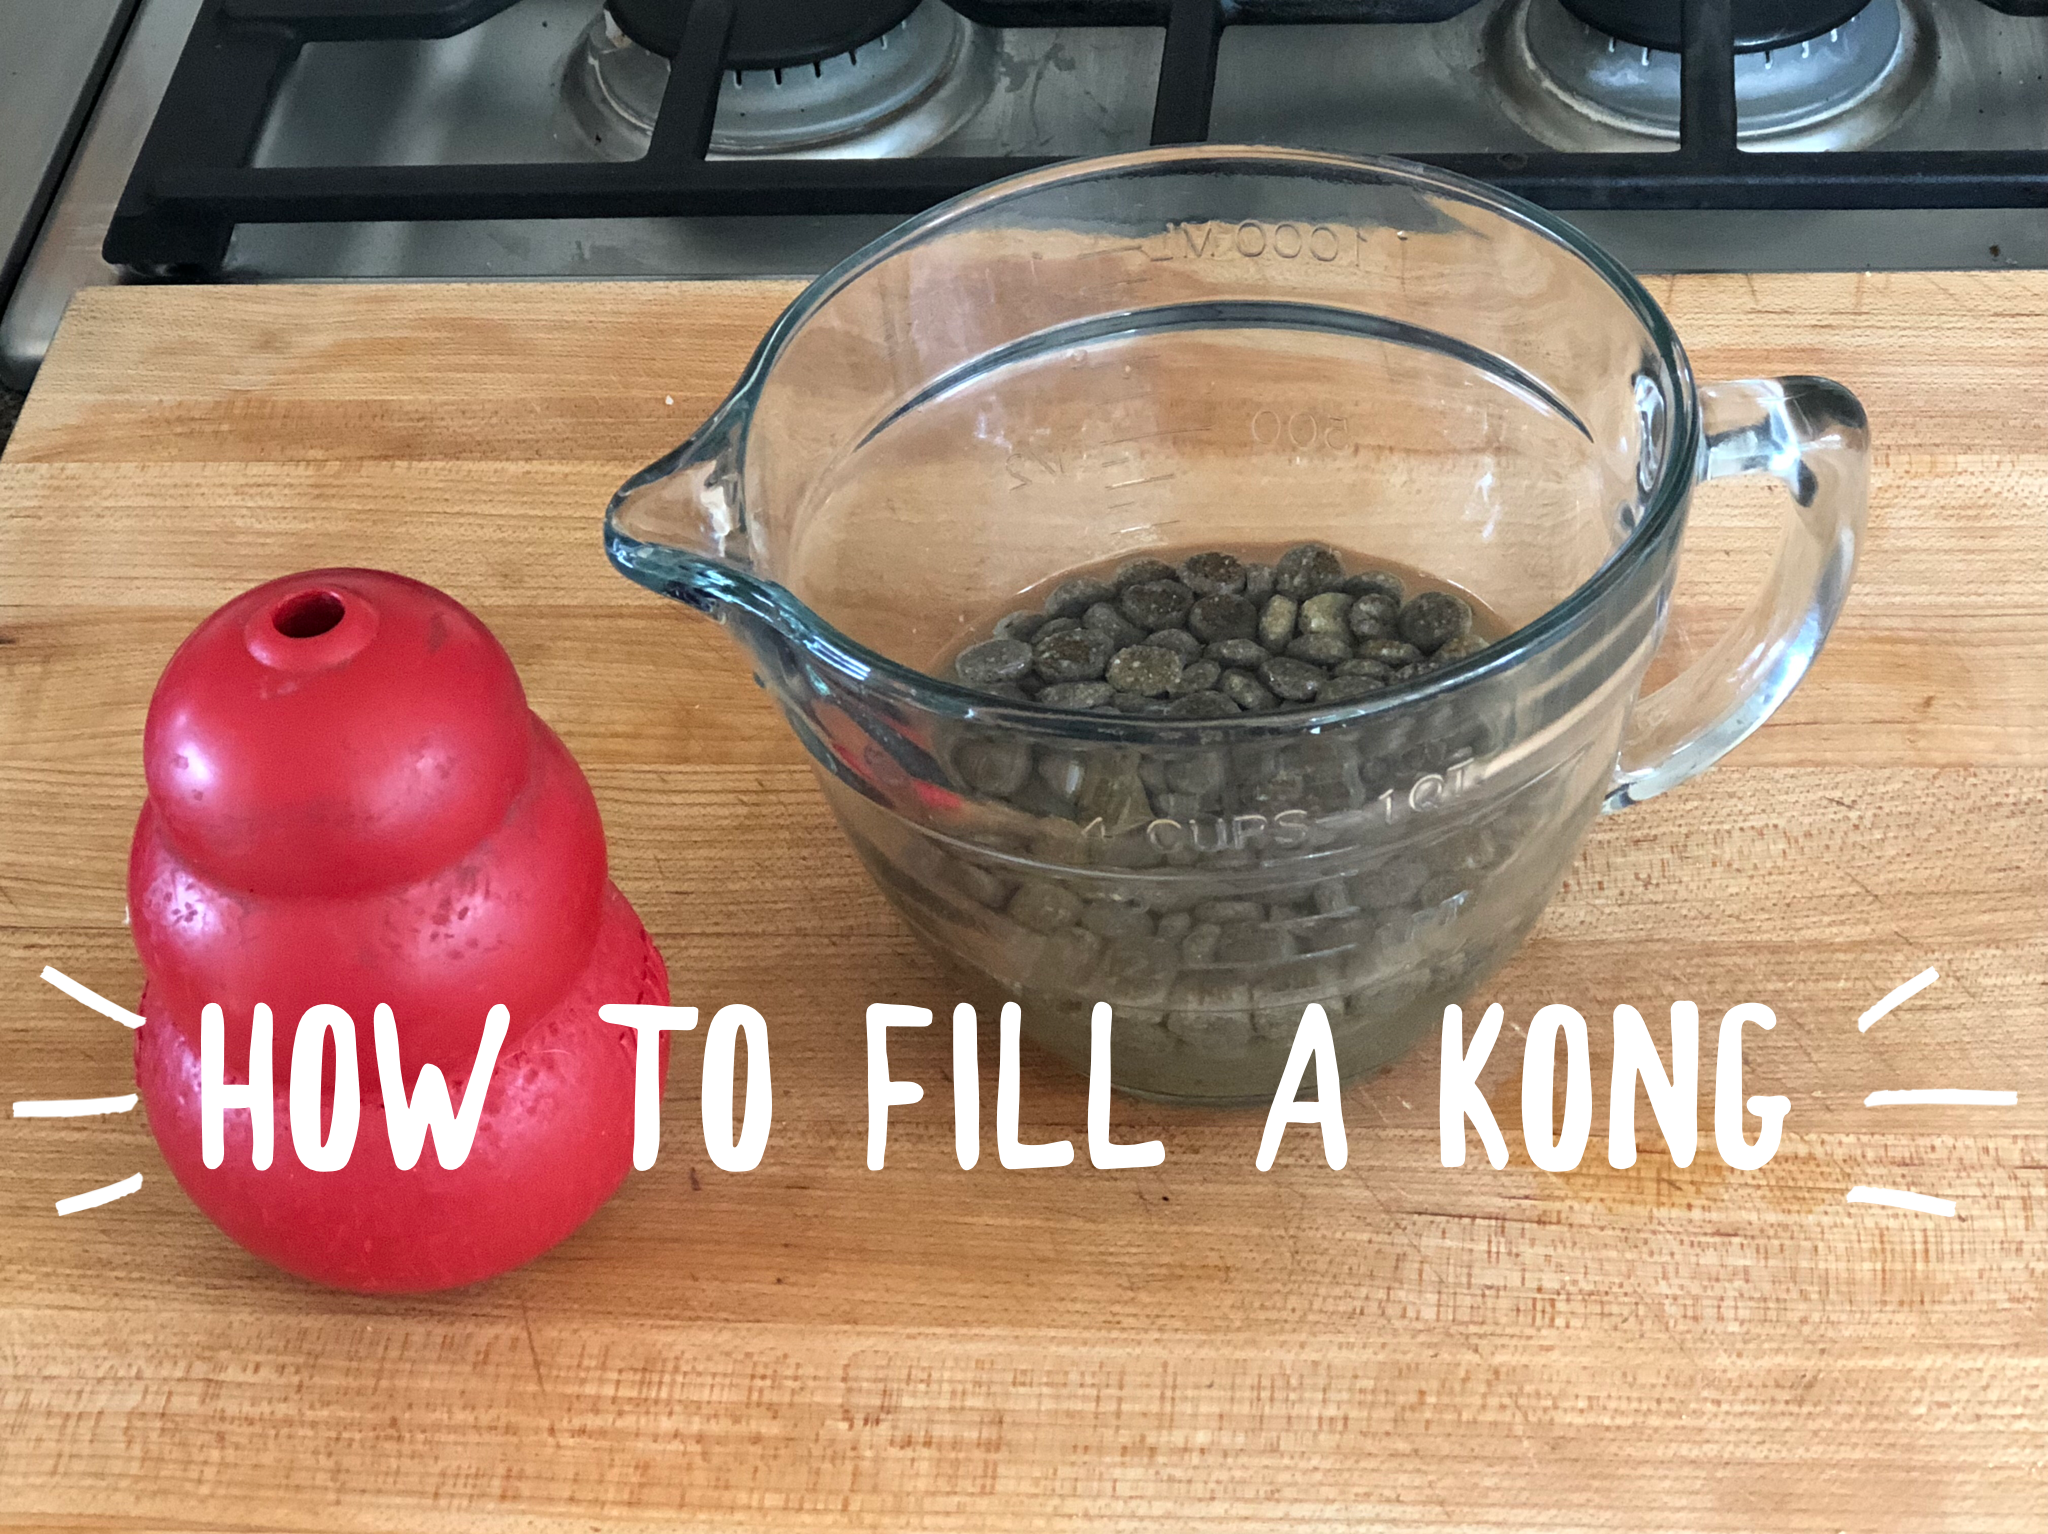 things to stuff kongs with